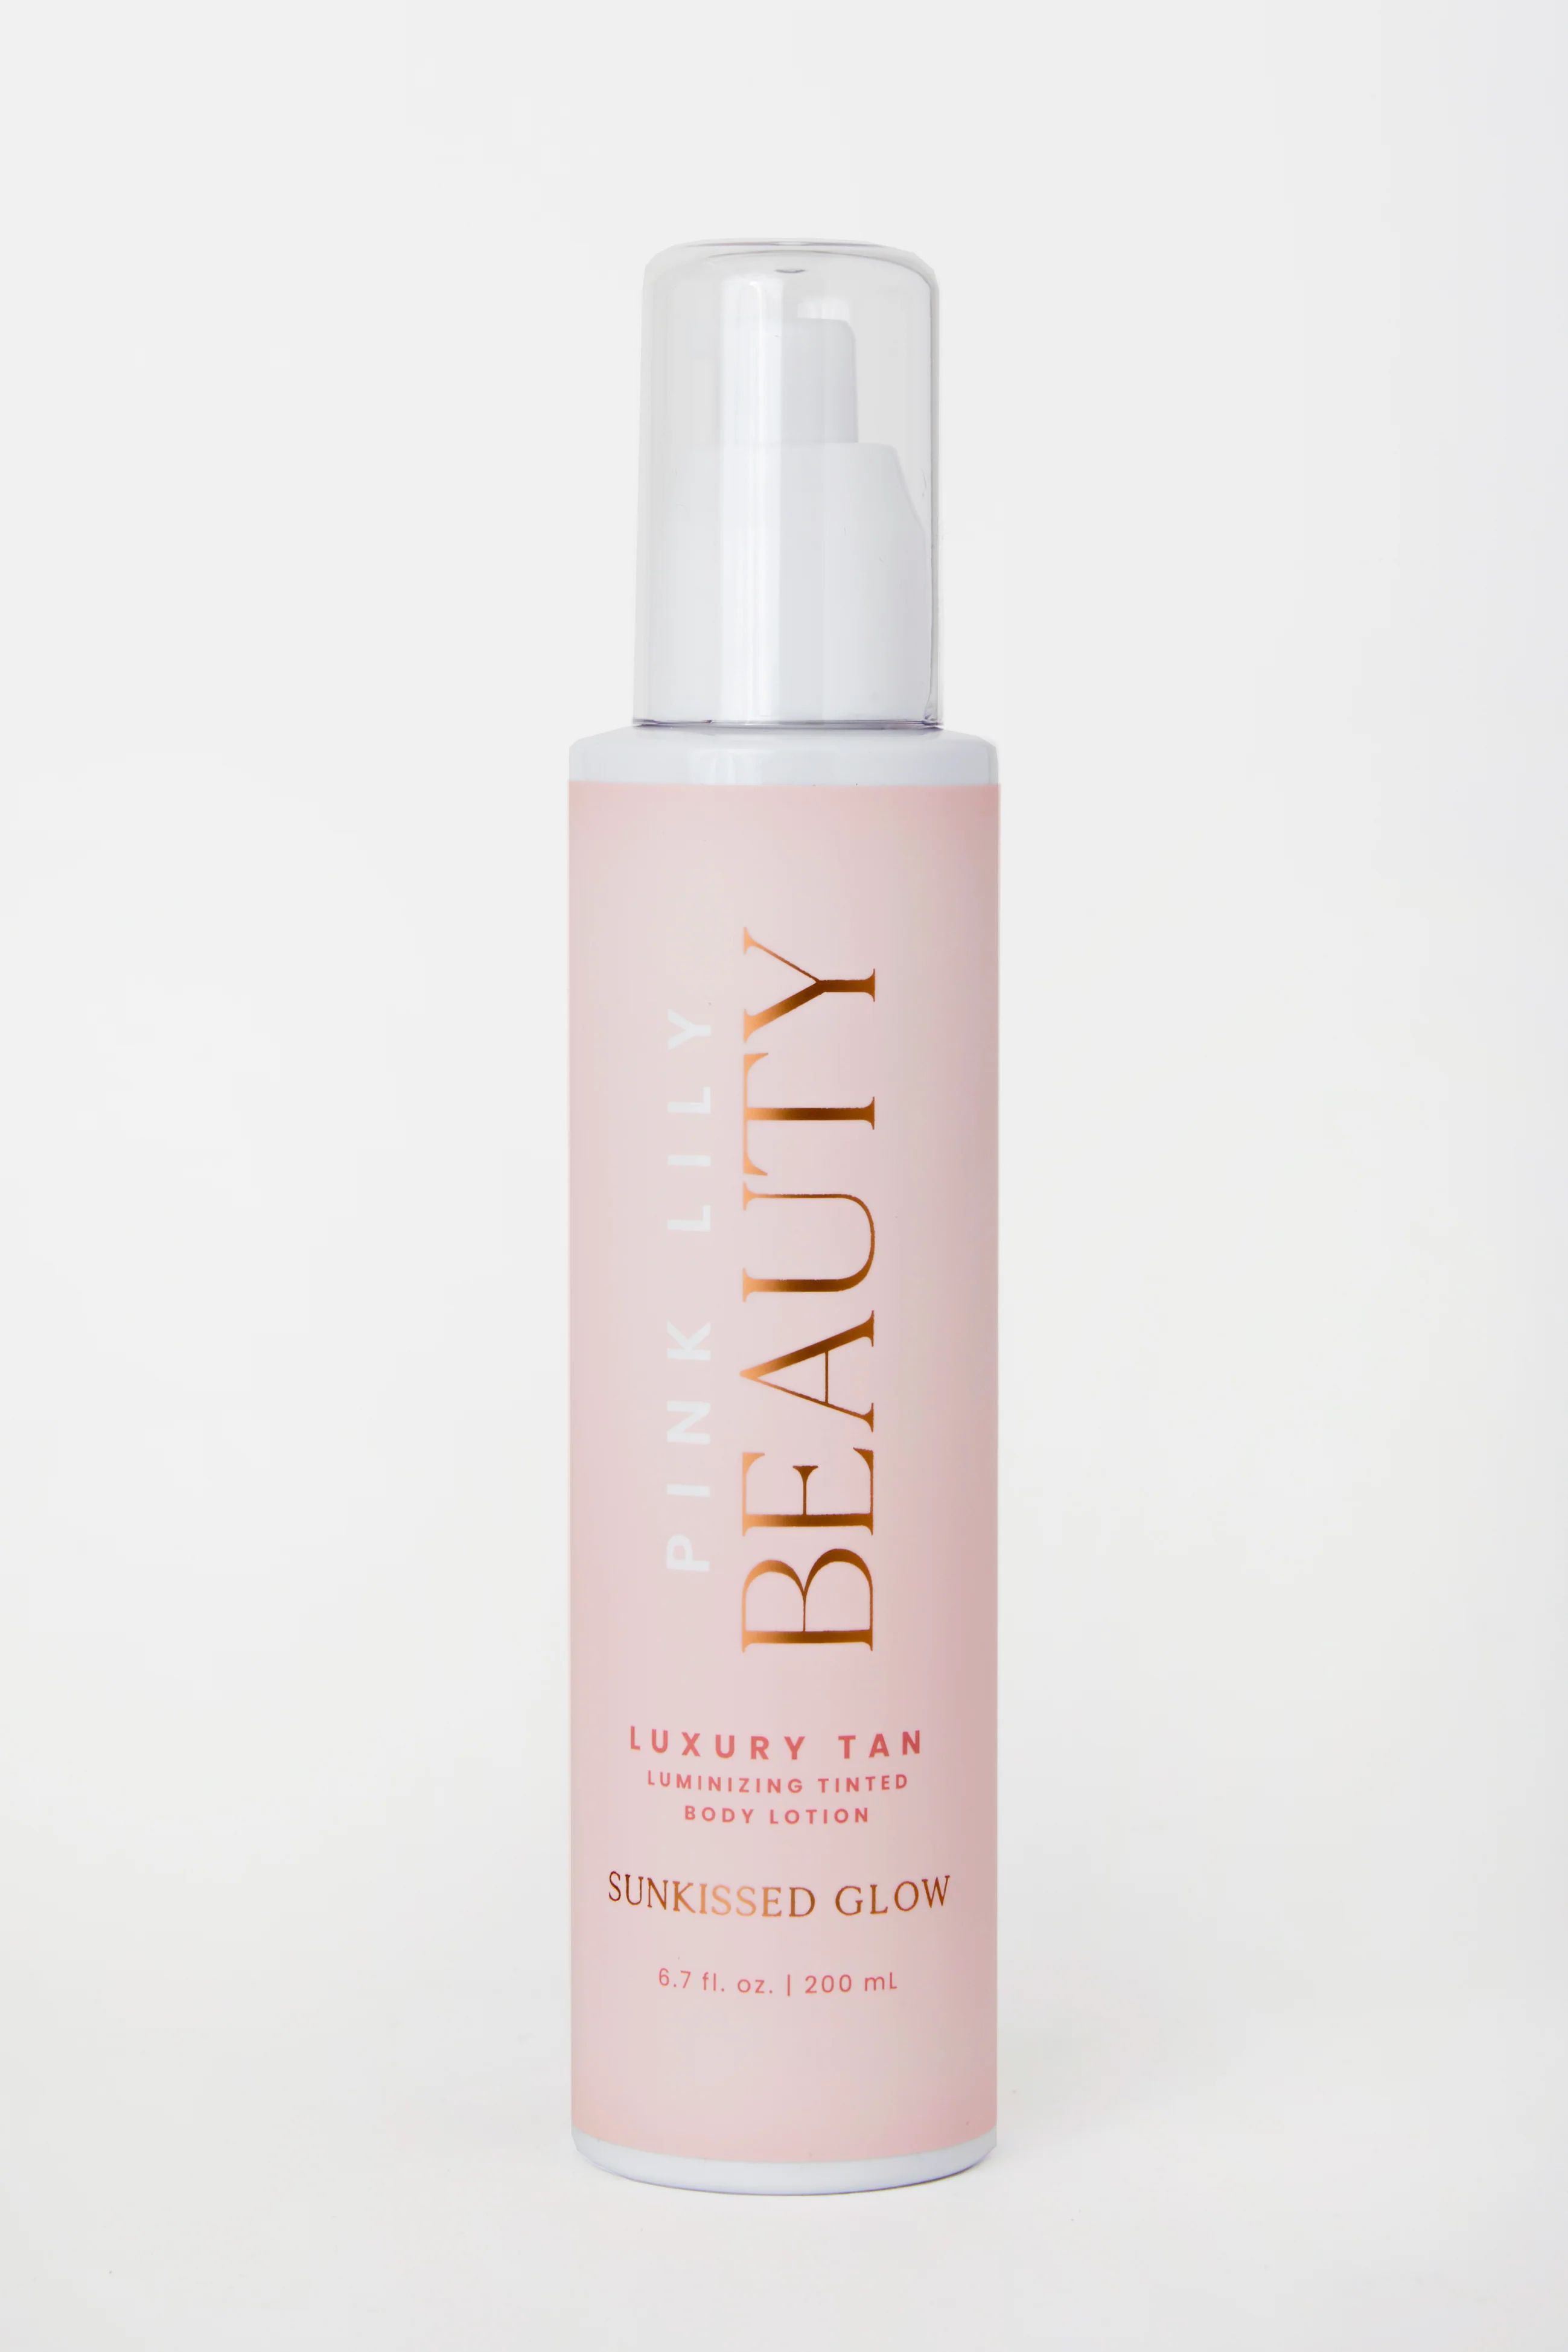 Pink Lily Luxury Tan Luminizing Body Lotion - Sunkissed Glow - Vegan and Cruelty Free | Pink Lily